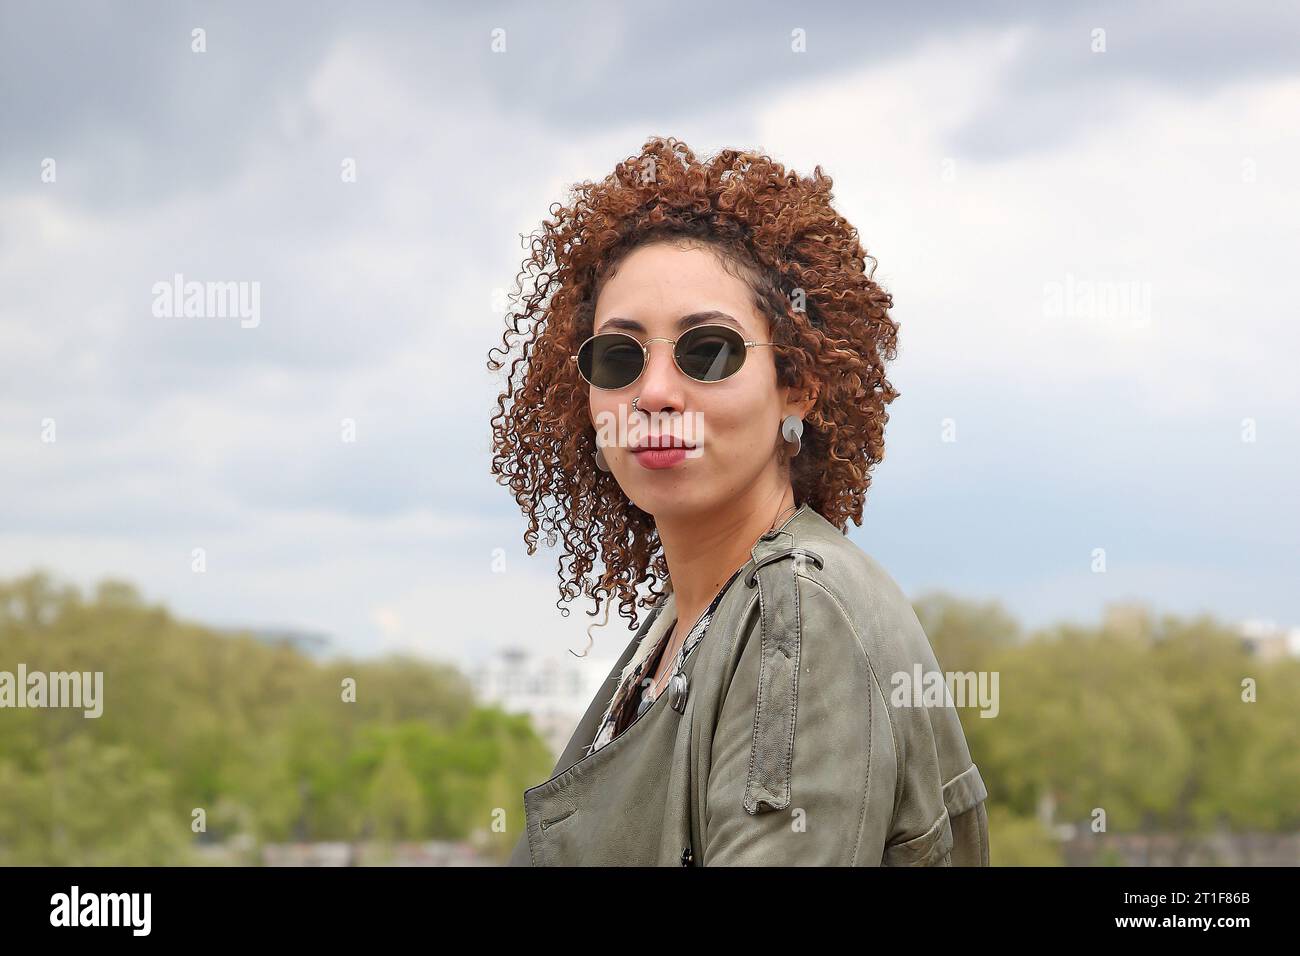 Head portrait of a cute curly hair woman with dark sunglasses smiling Stock Photo